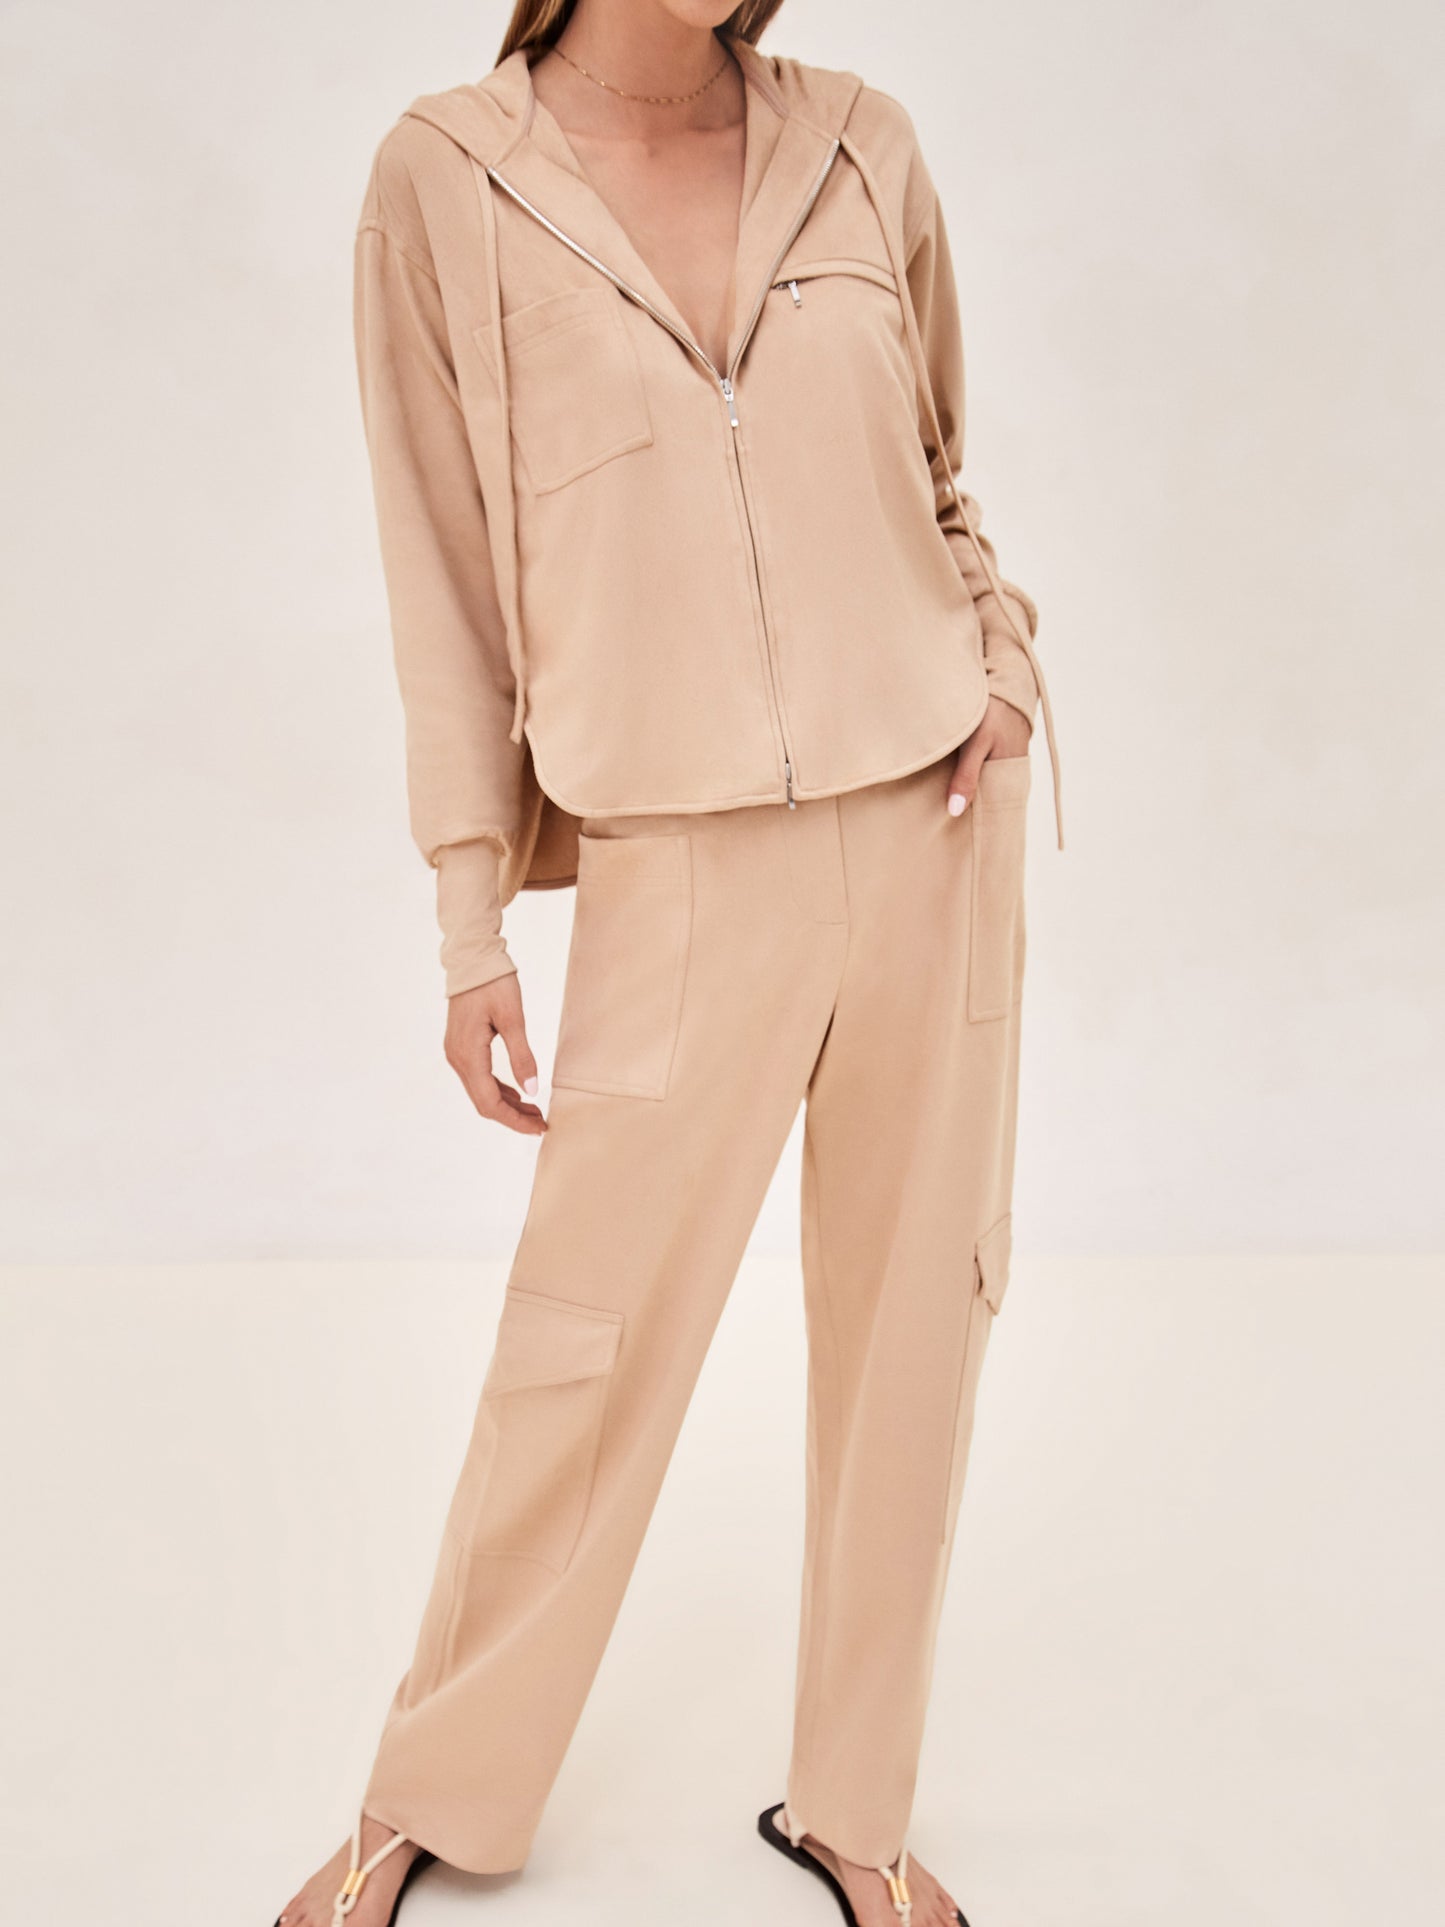 ALEXIS Suda top with zipper and hood in camel